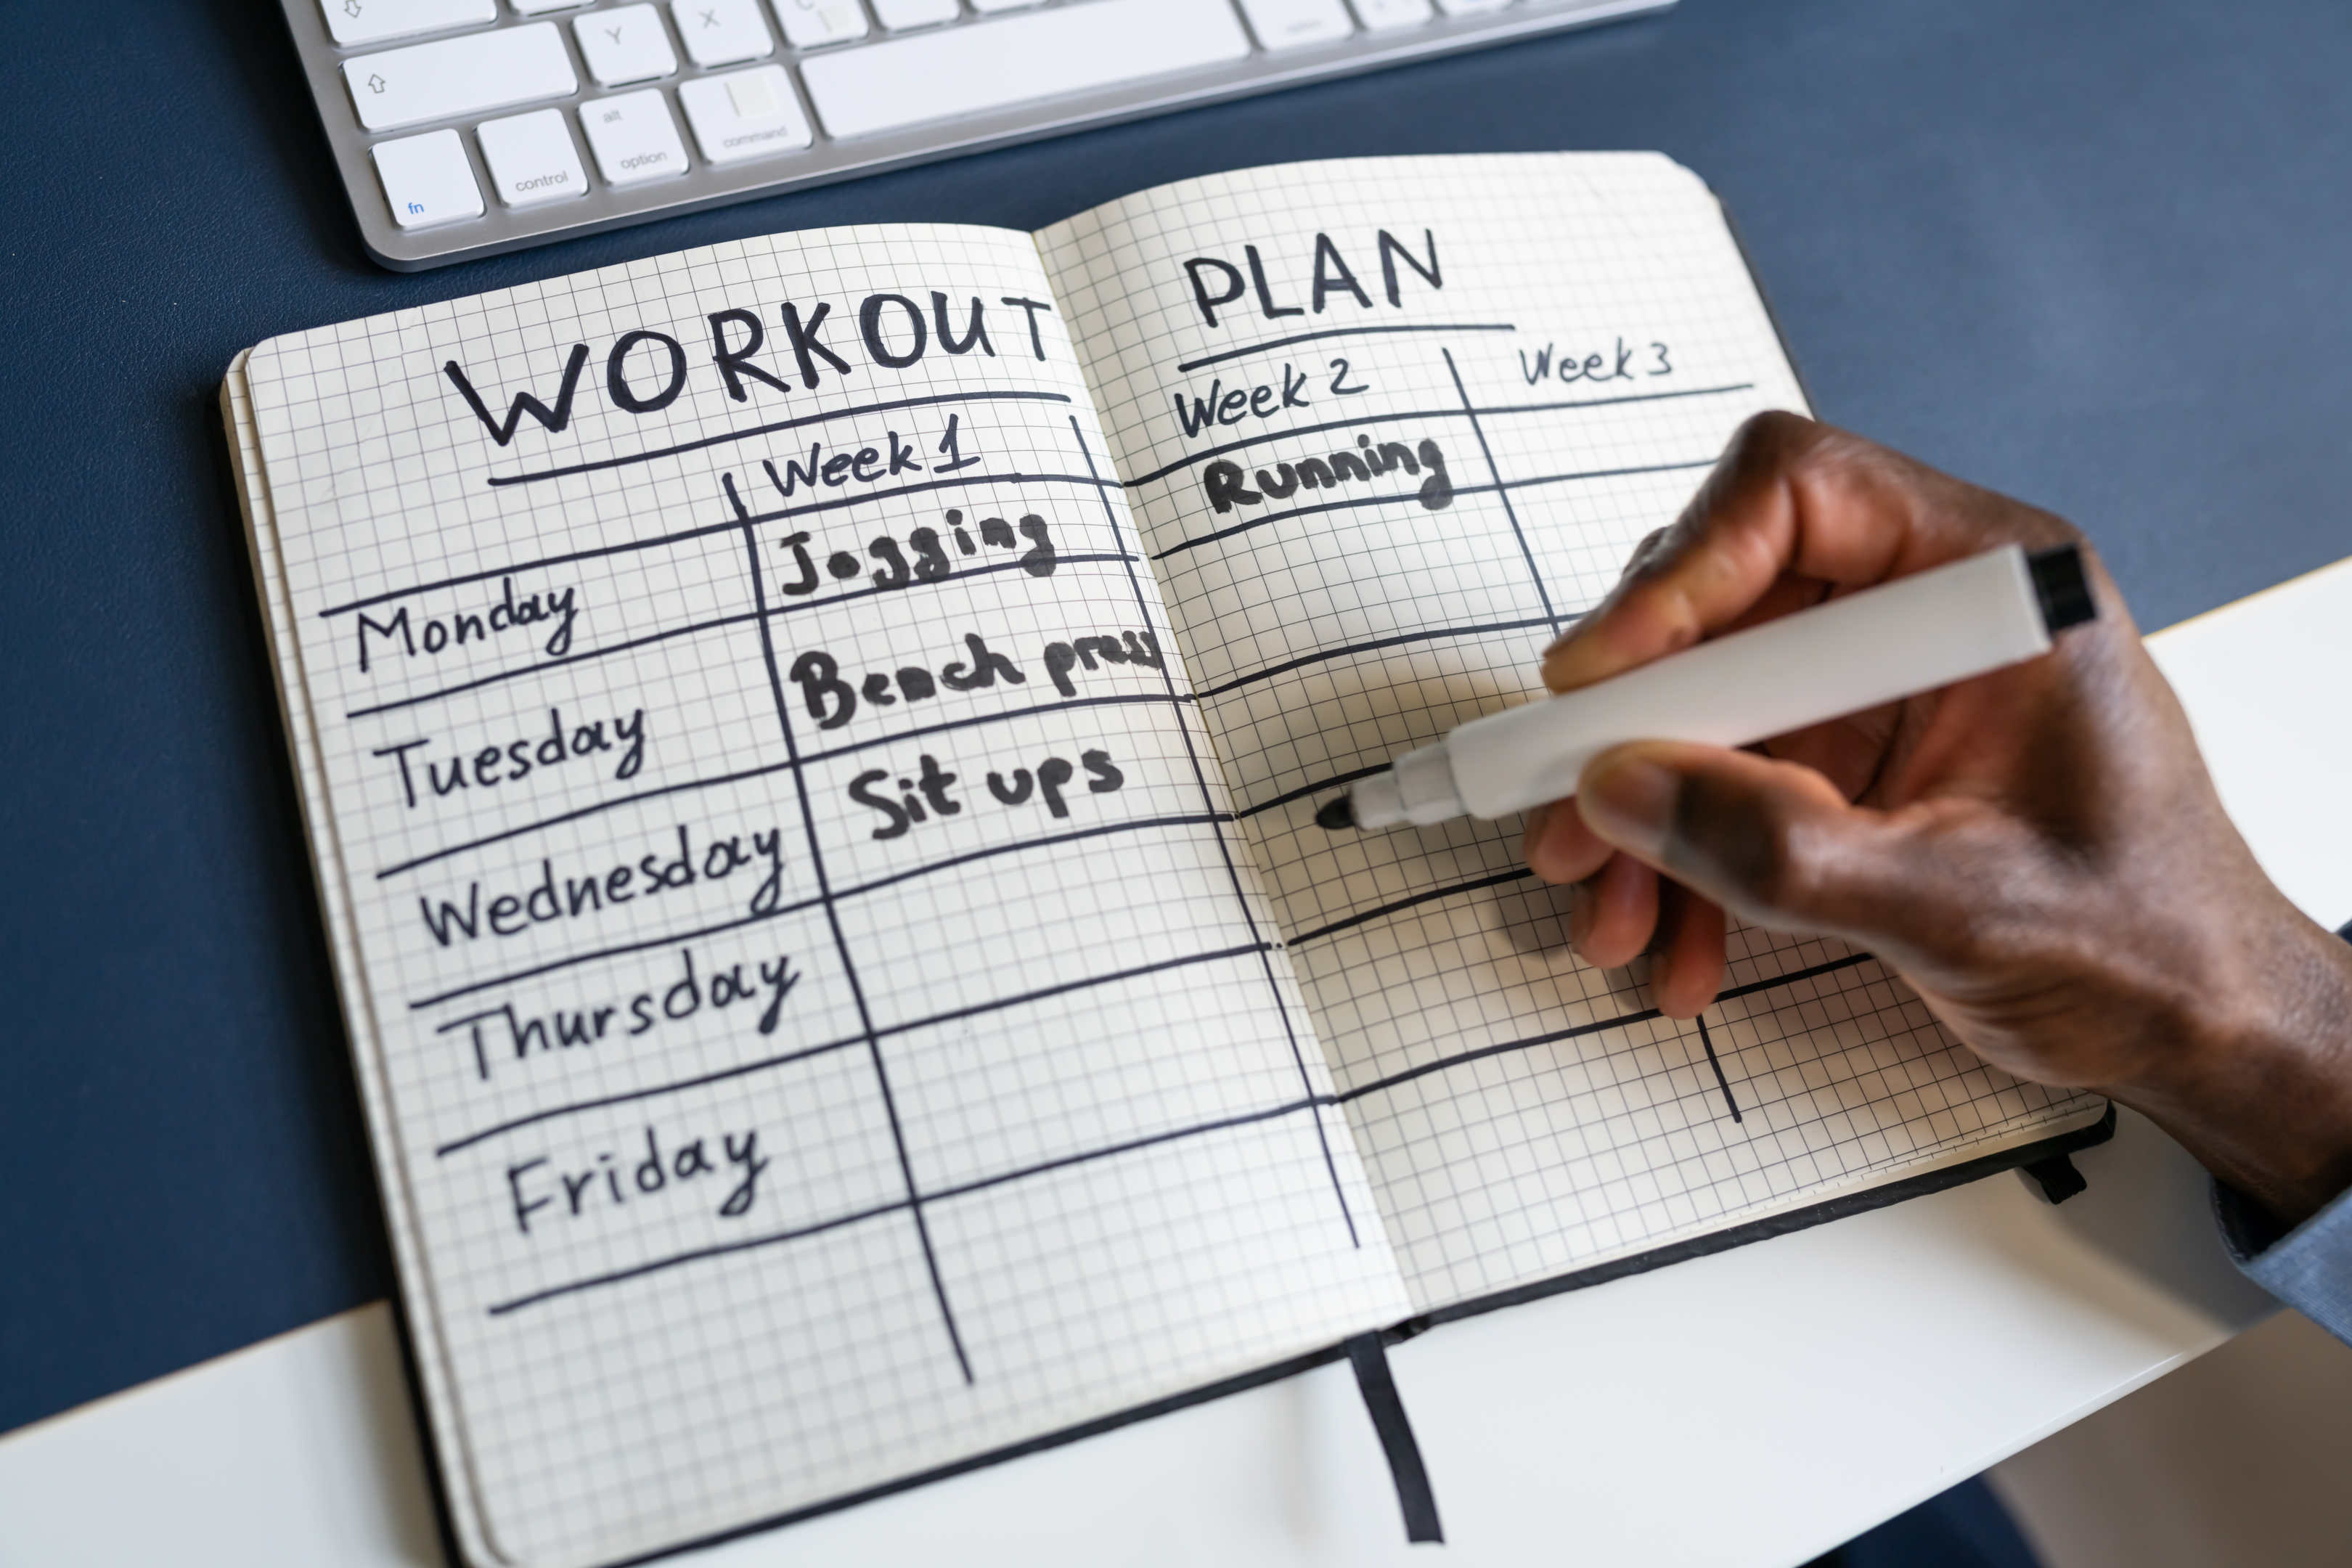 Lose weight in 2 months by creating a workout plan.